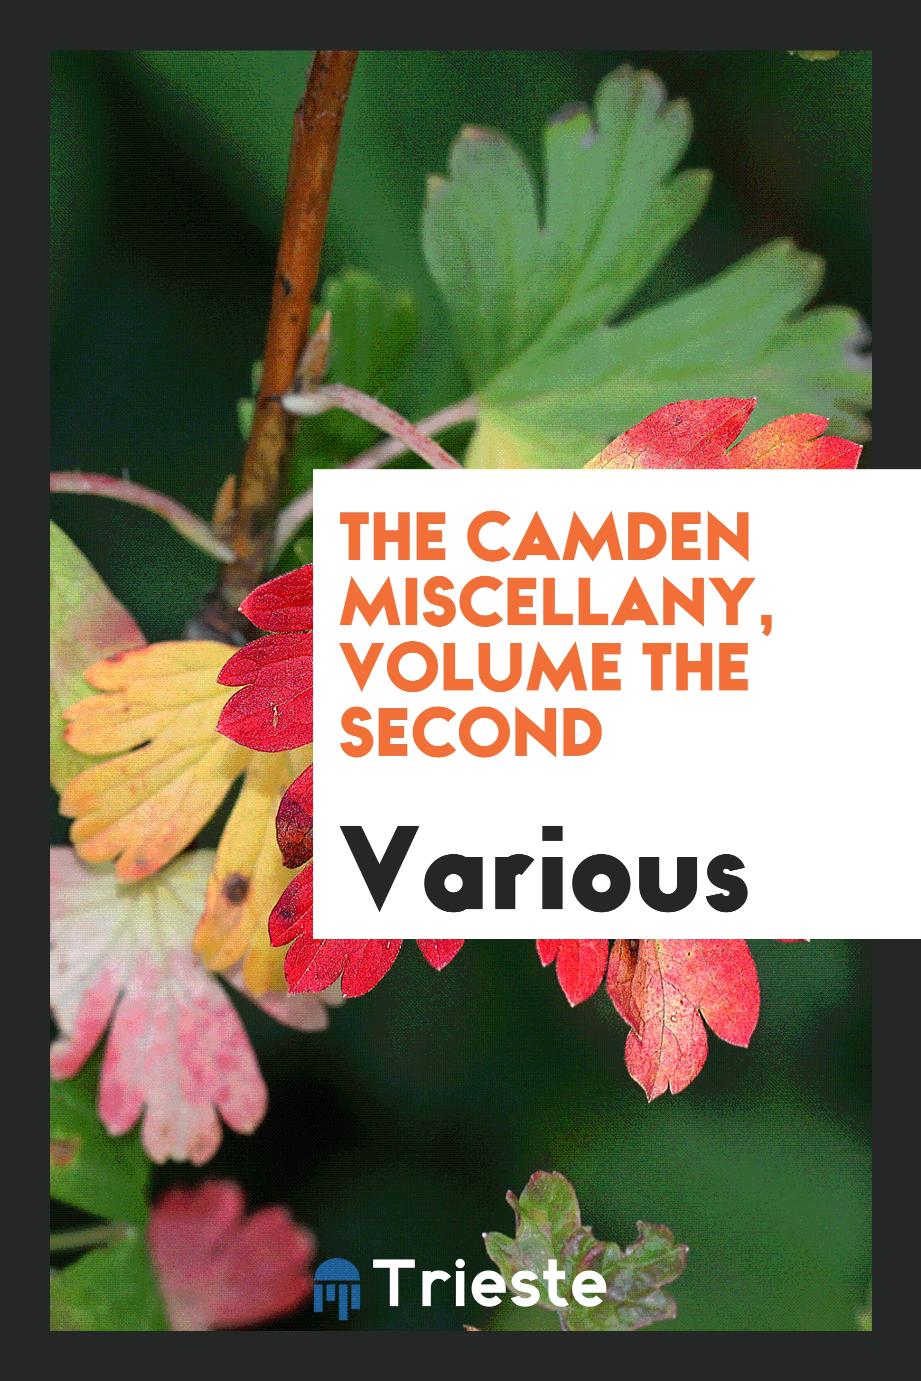 The Camden Miscellany, volume the second